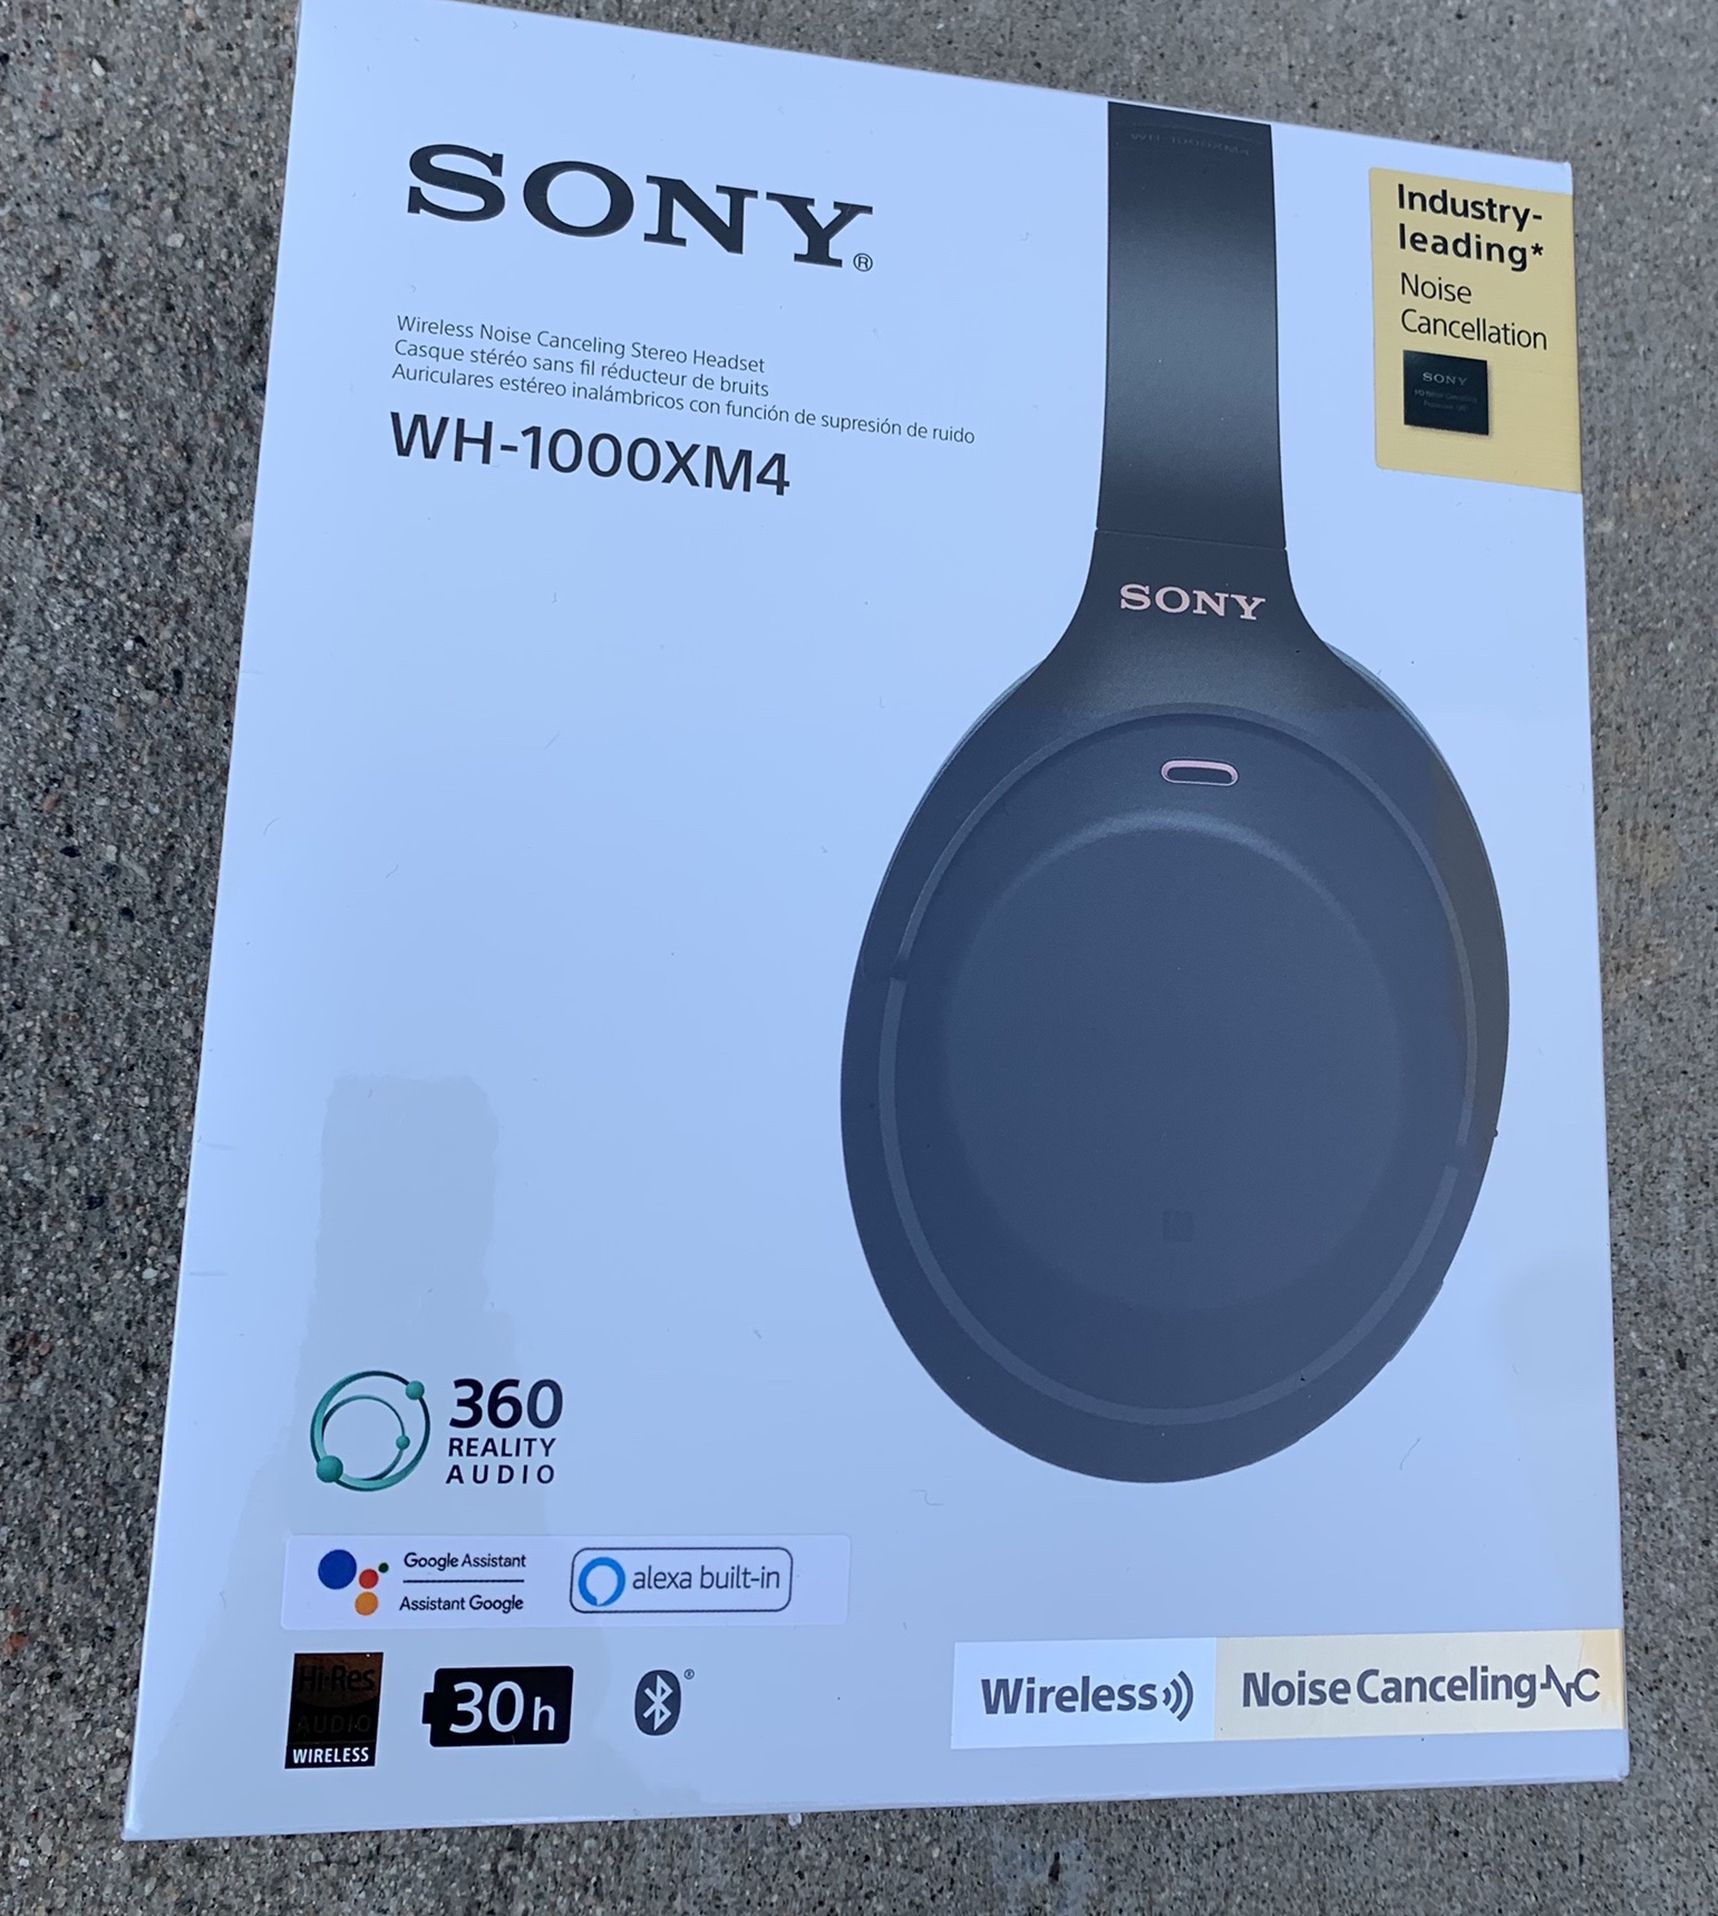 New Sony Wh-1000xm4